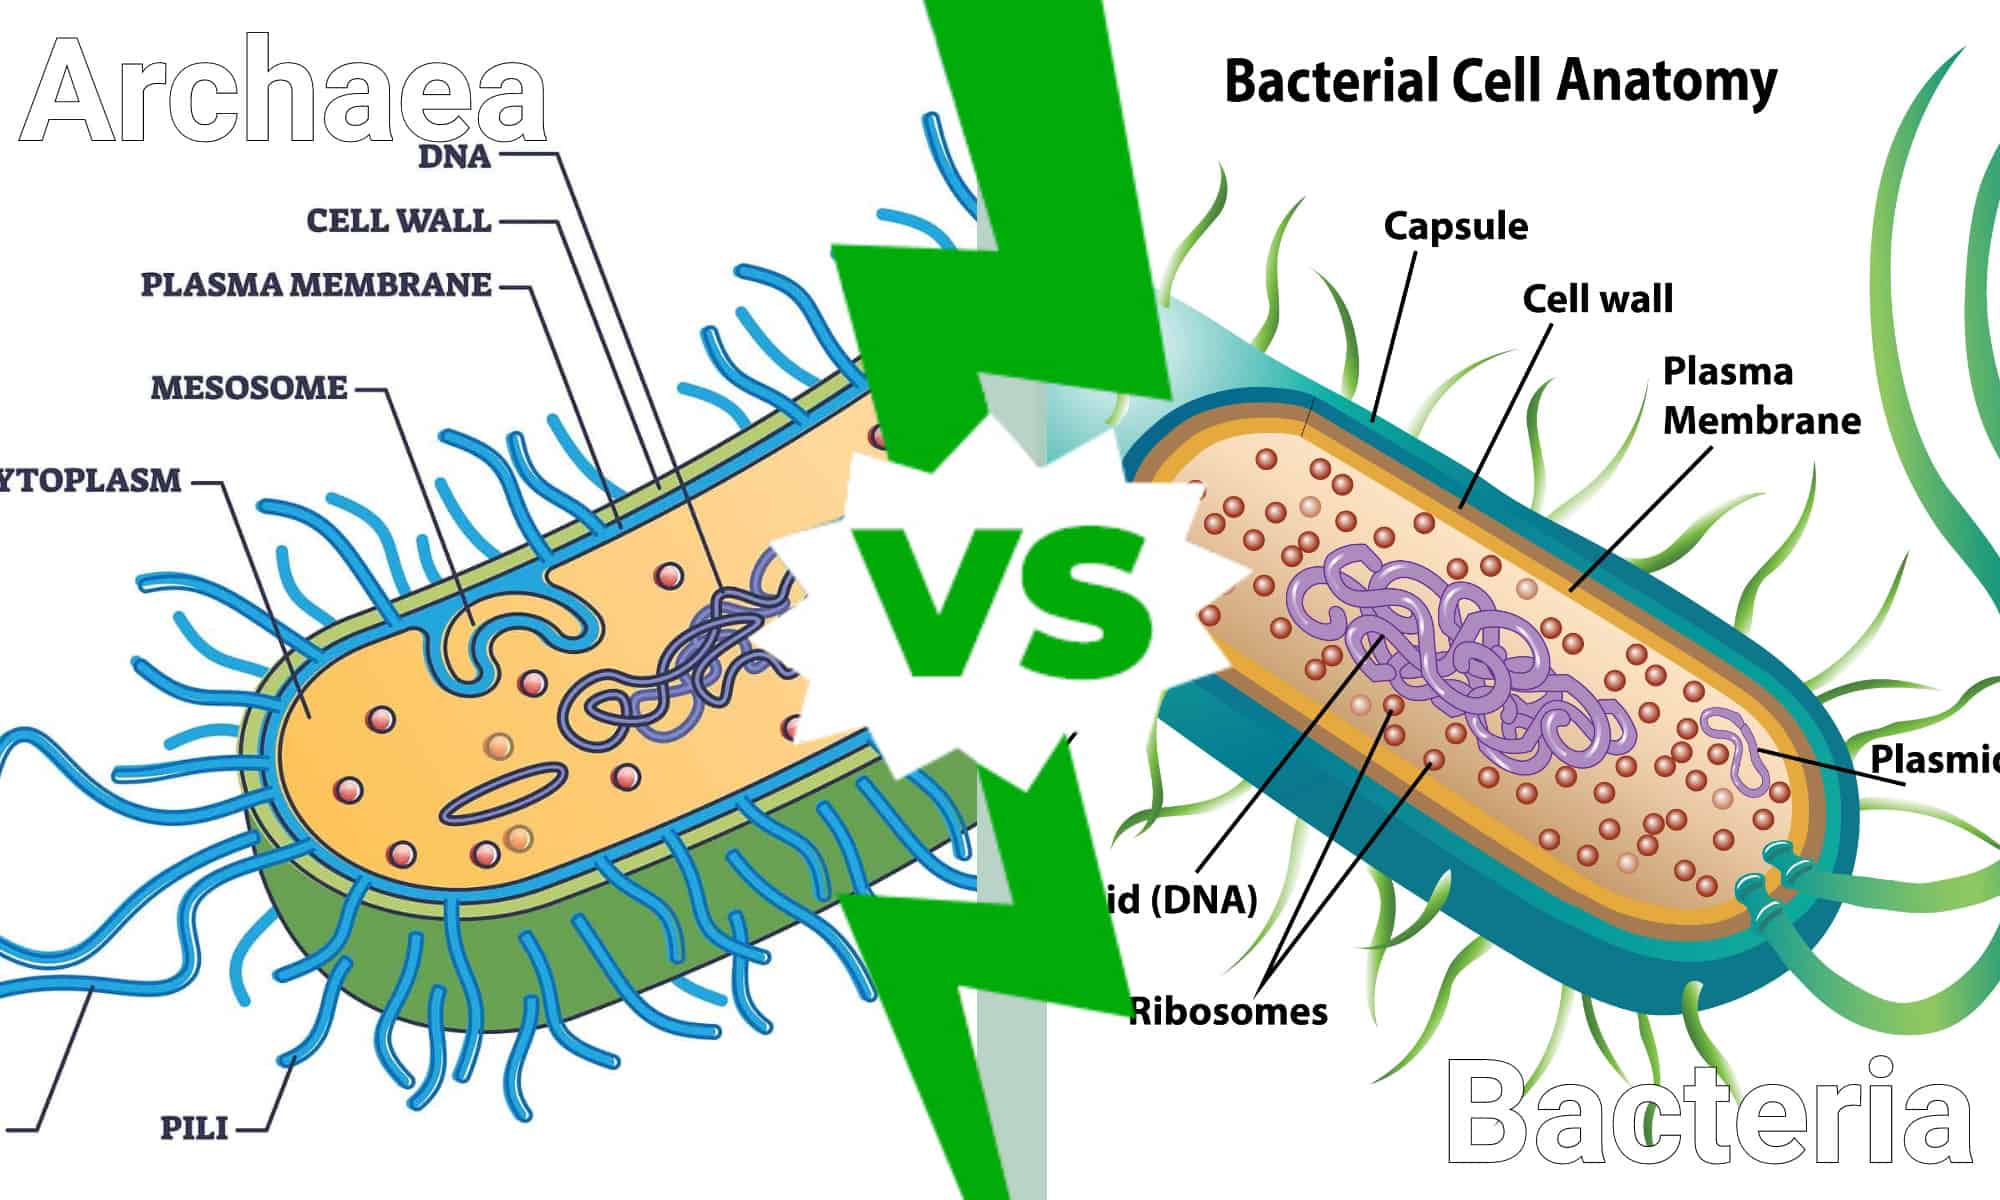 archaeal cells vs bacterial cells